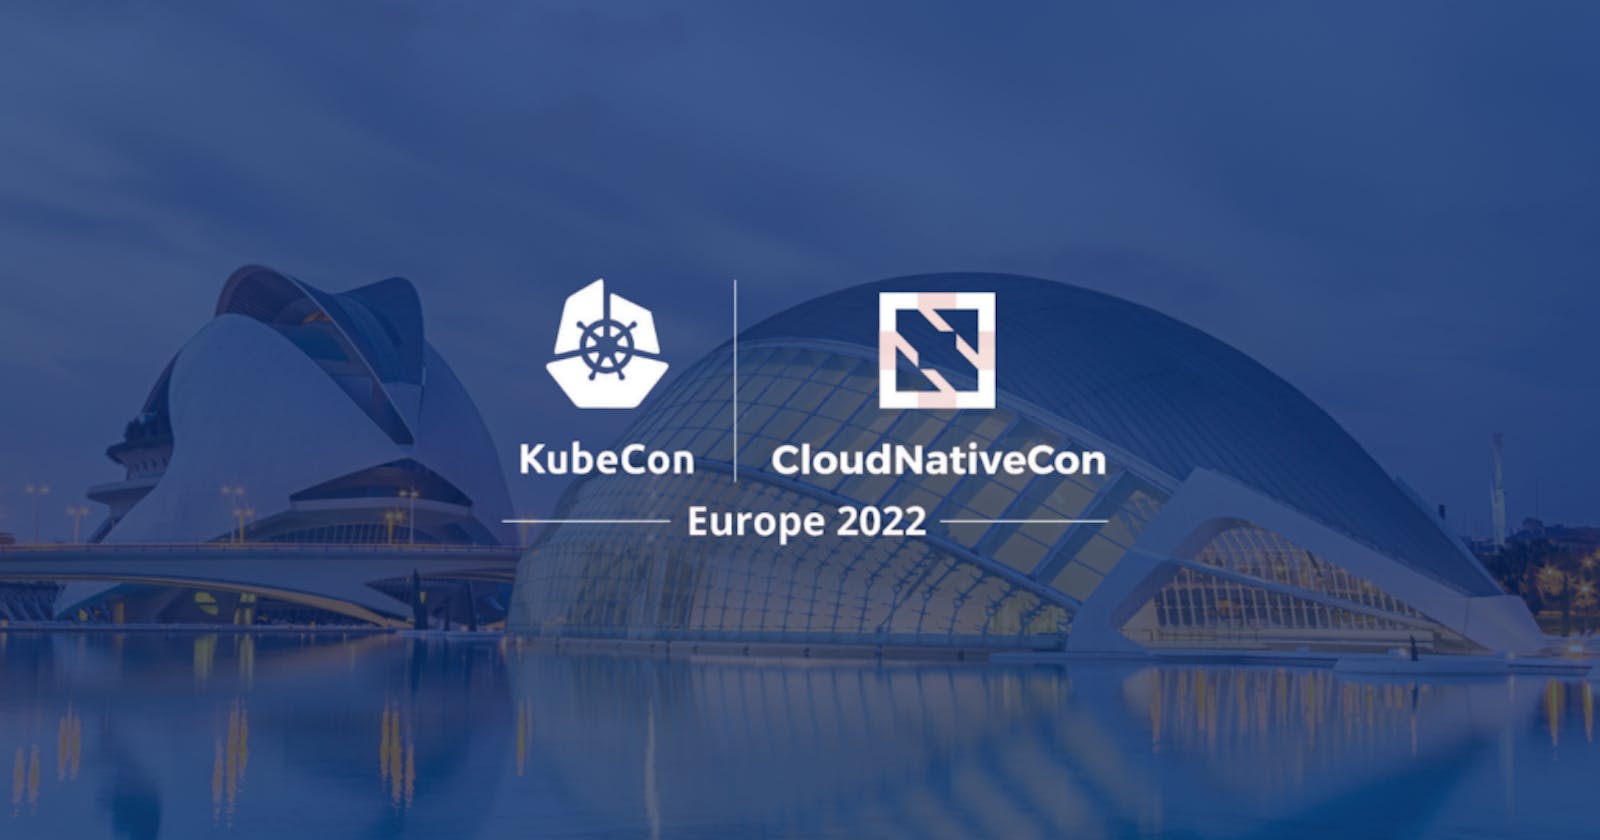 My First KubeCon Experience and key Takeaways